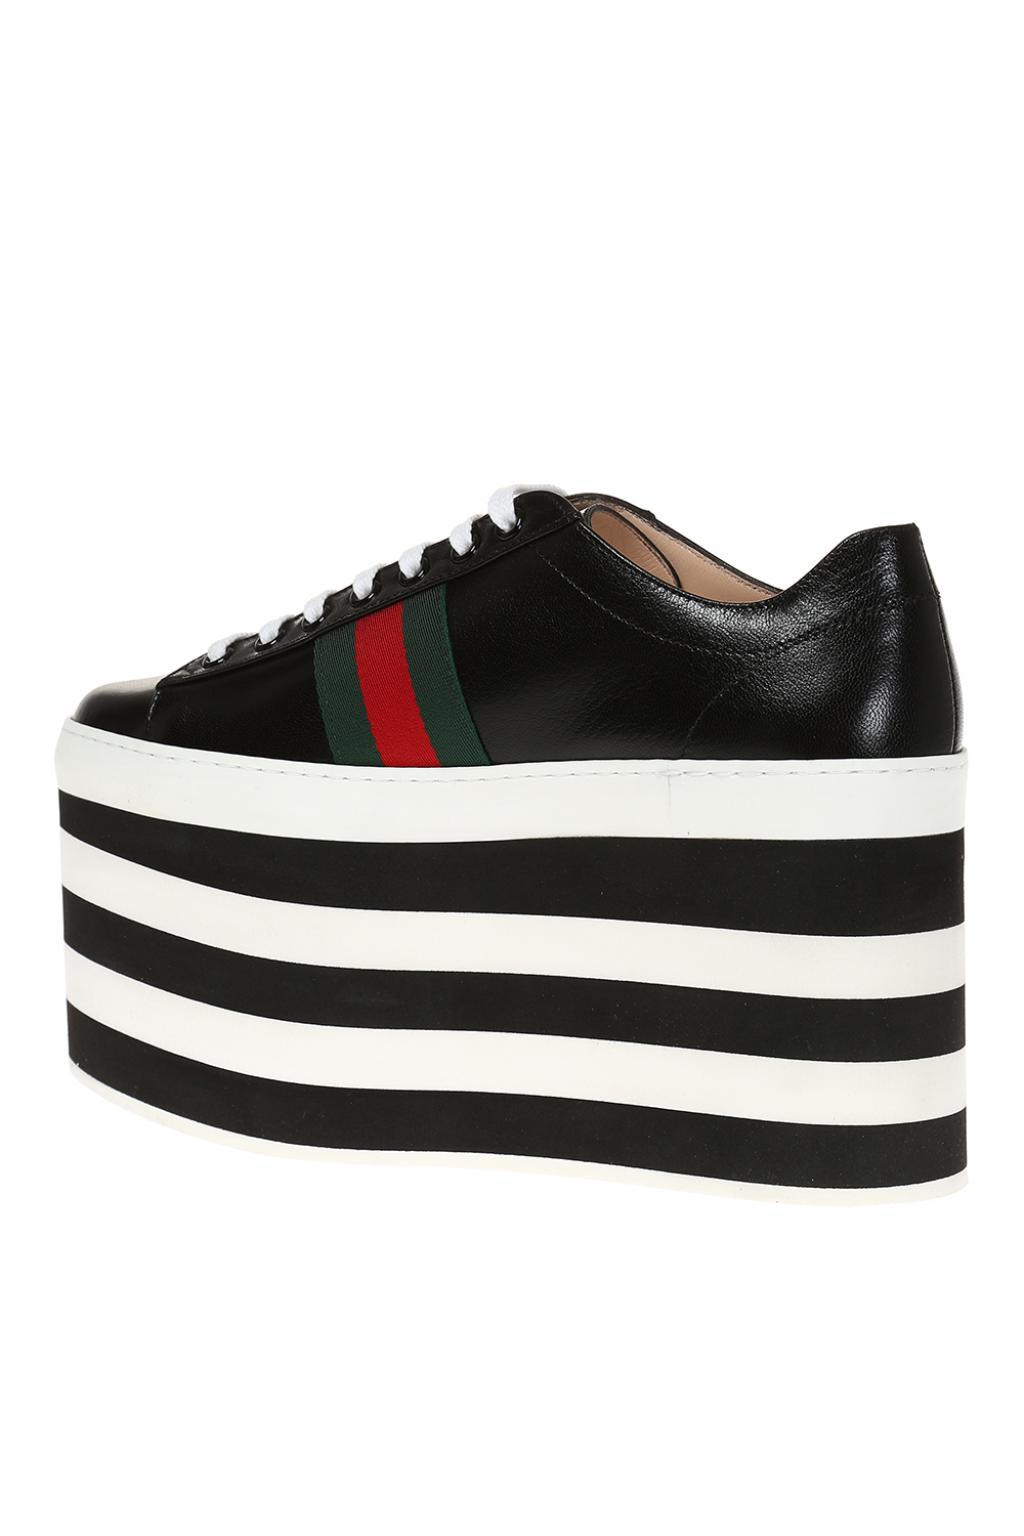 Gucci Leather High Platform Sneakers in Black | Lyst